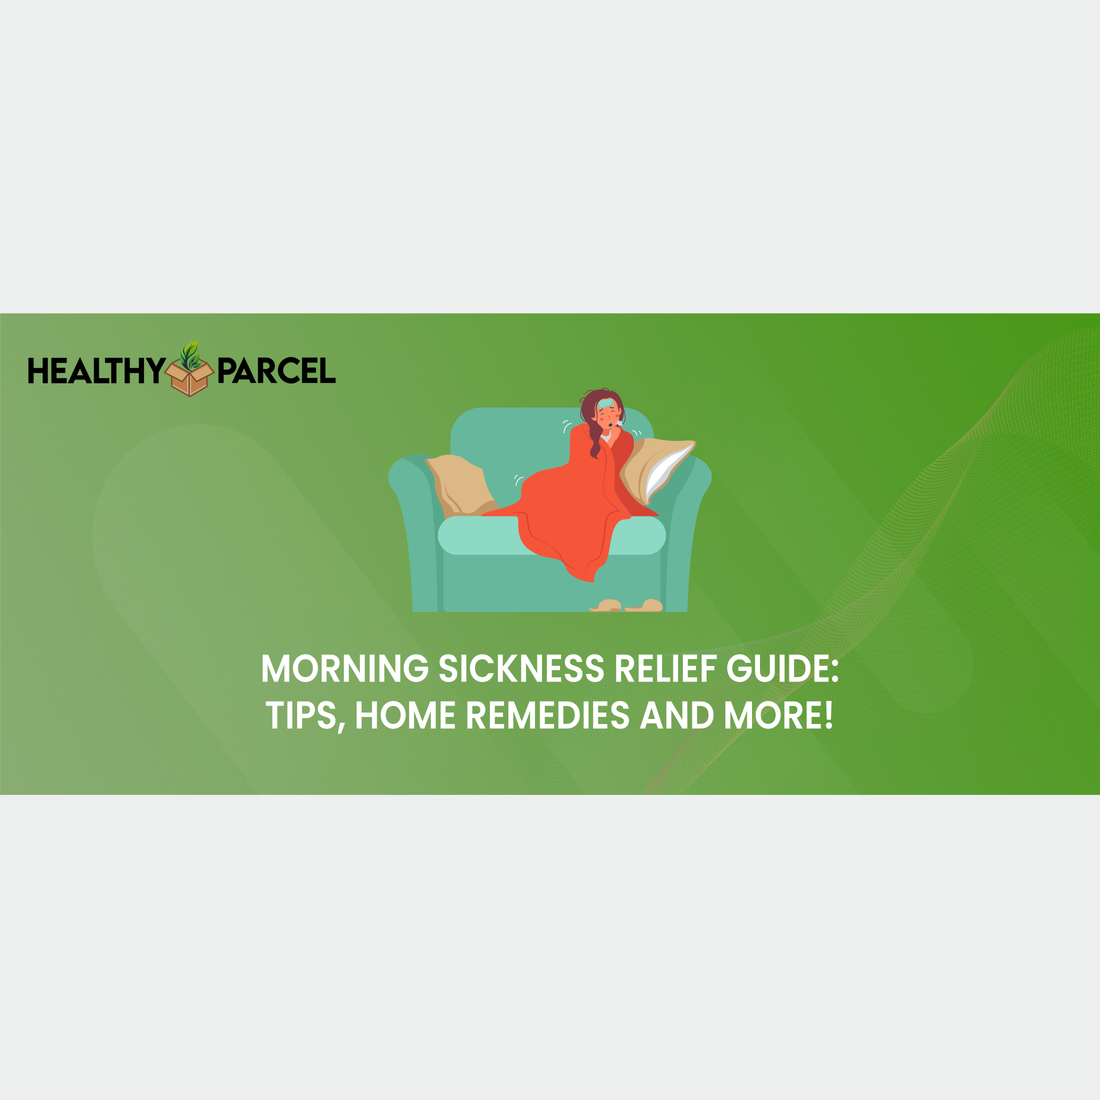 Morning Sickness Relief Guide Tips, Home Remedies and More!